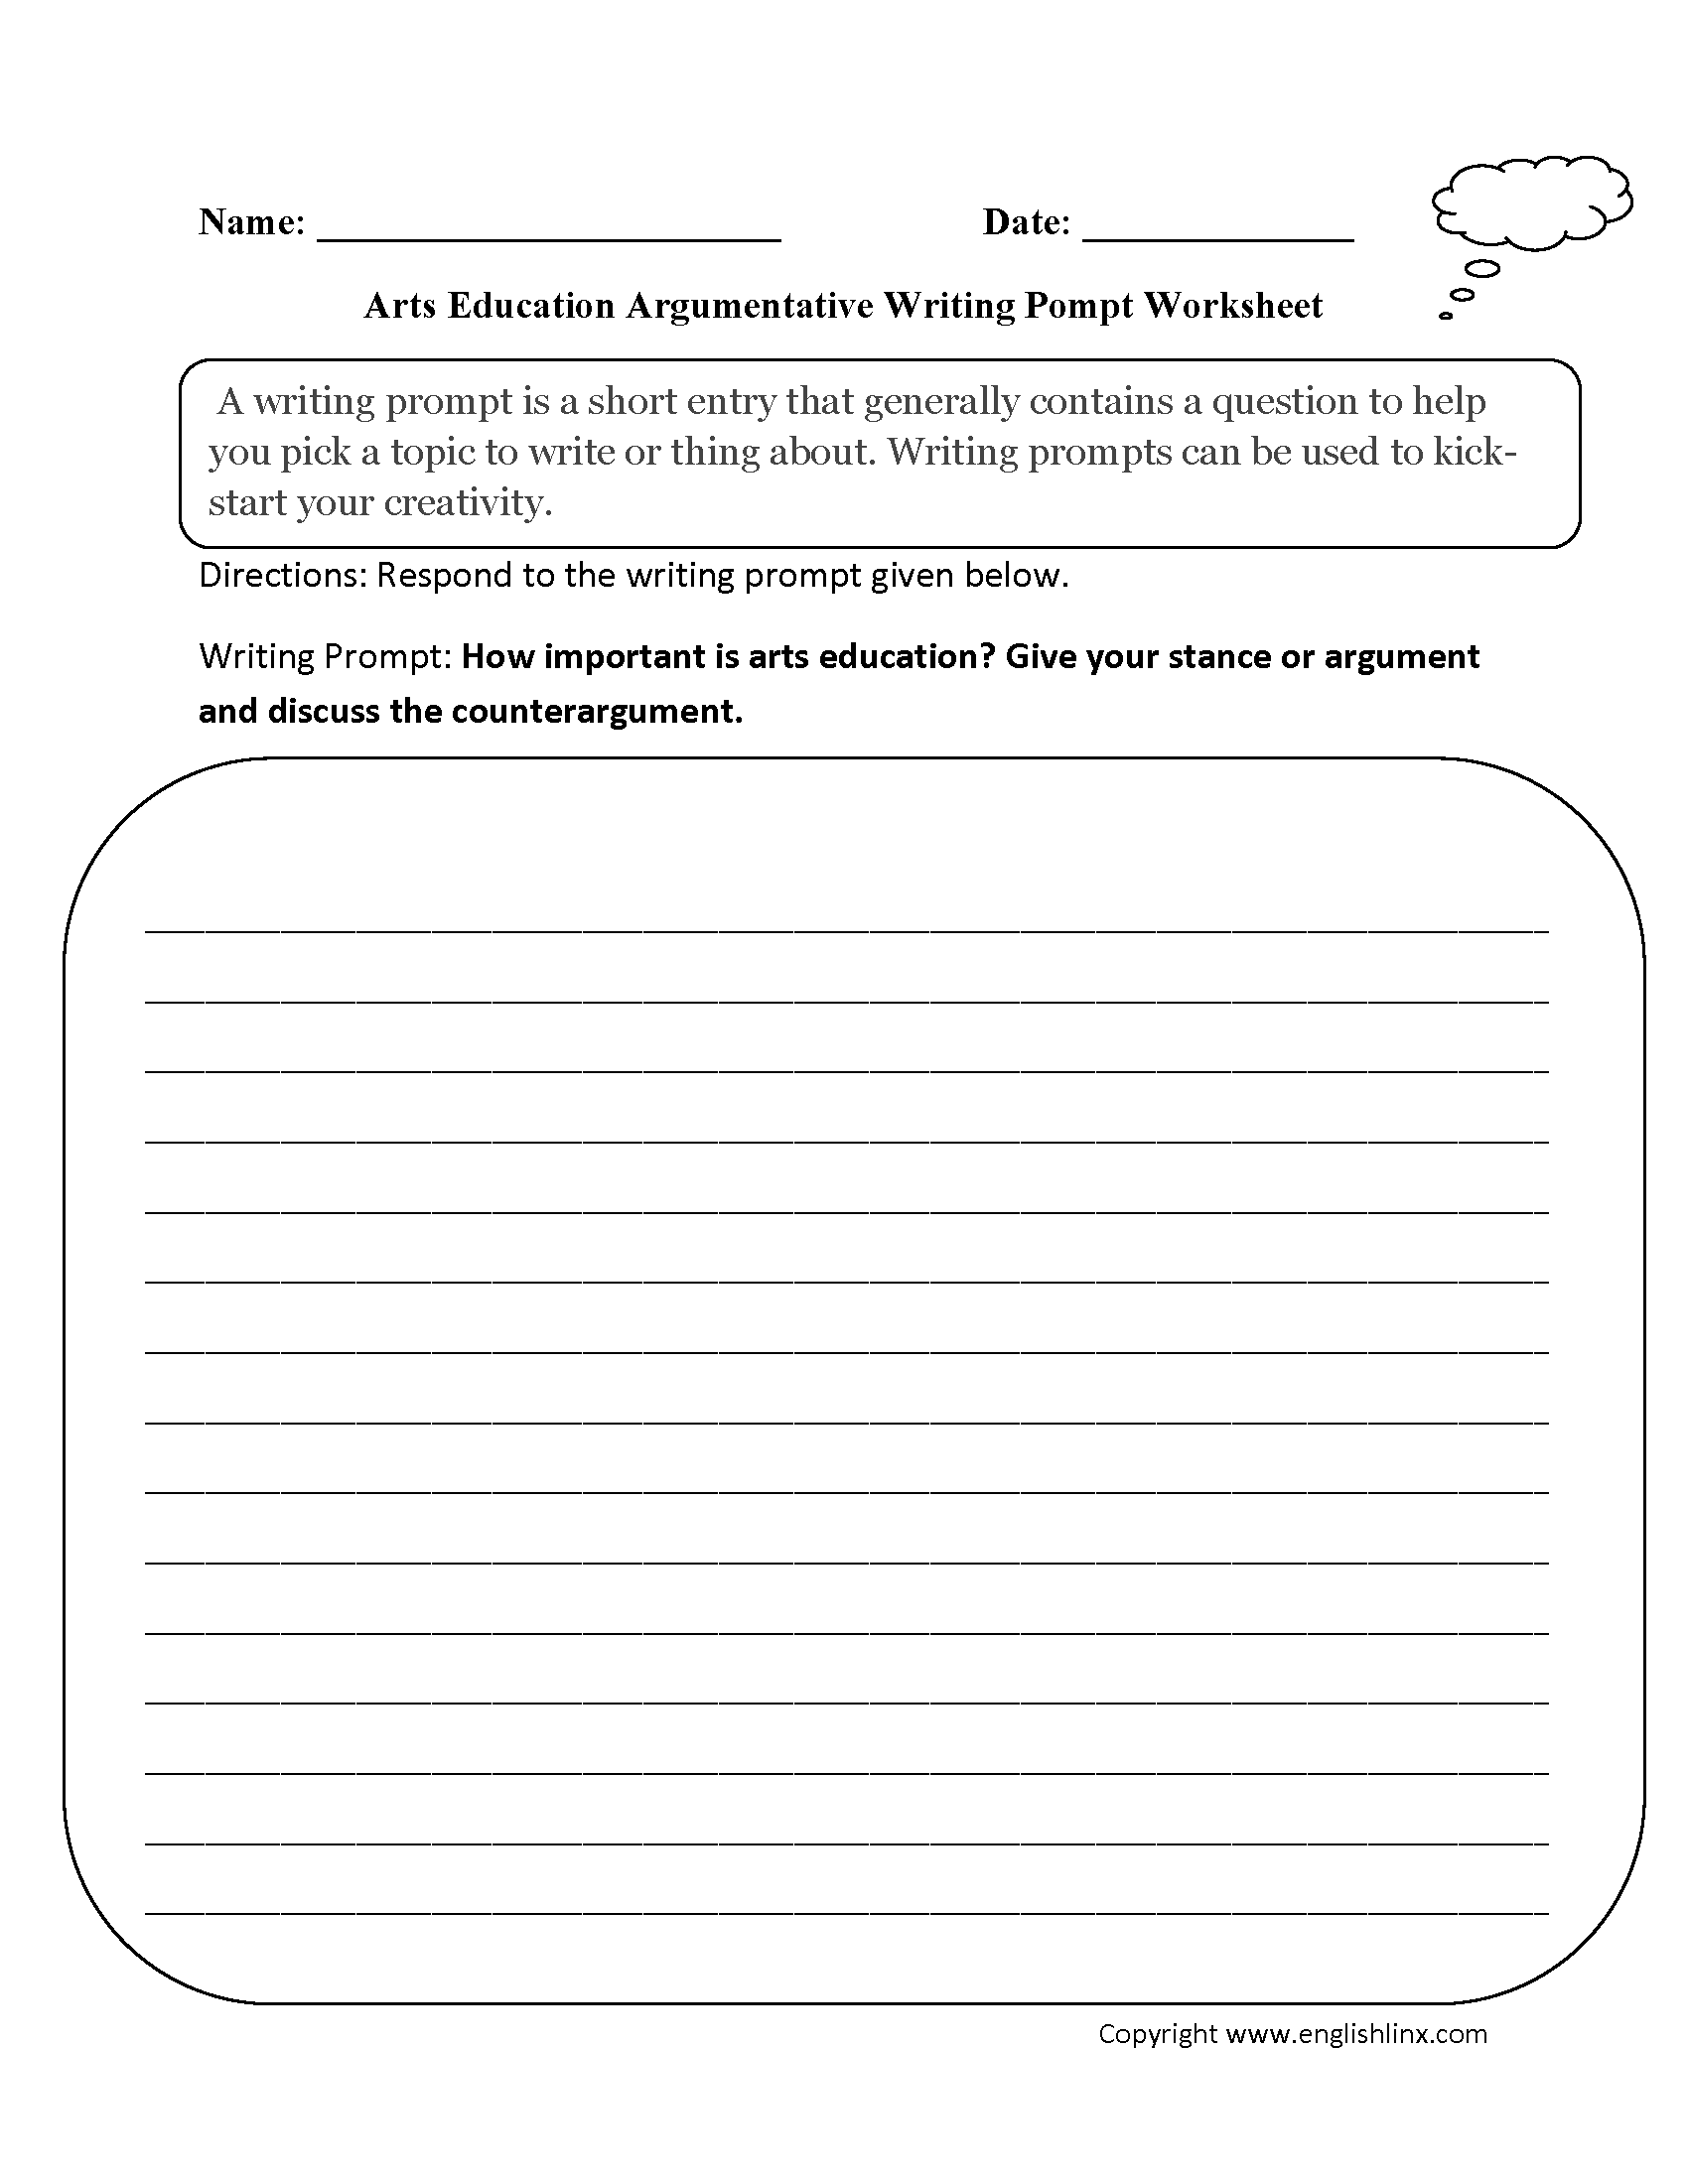 Georgia 8th grade writing test sample prompts for thesis